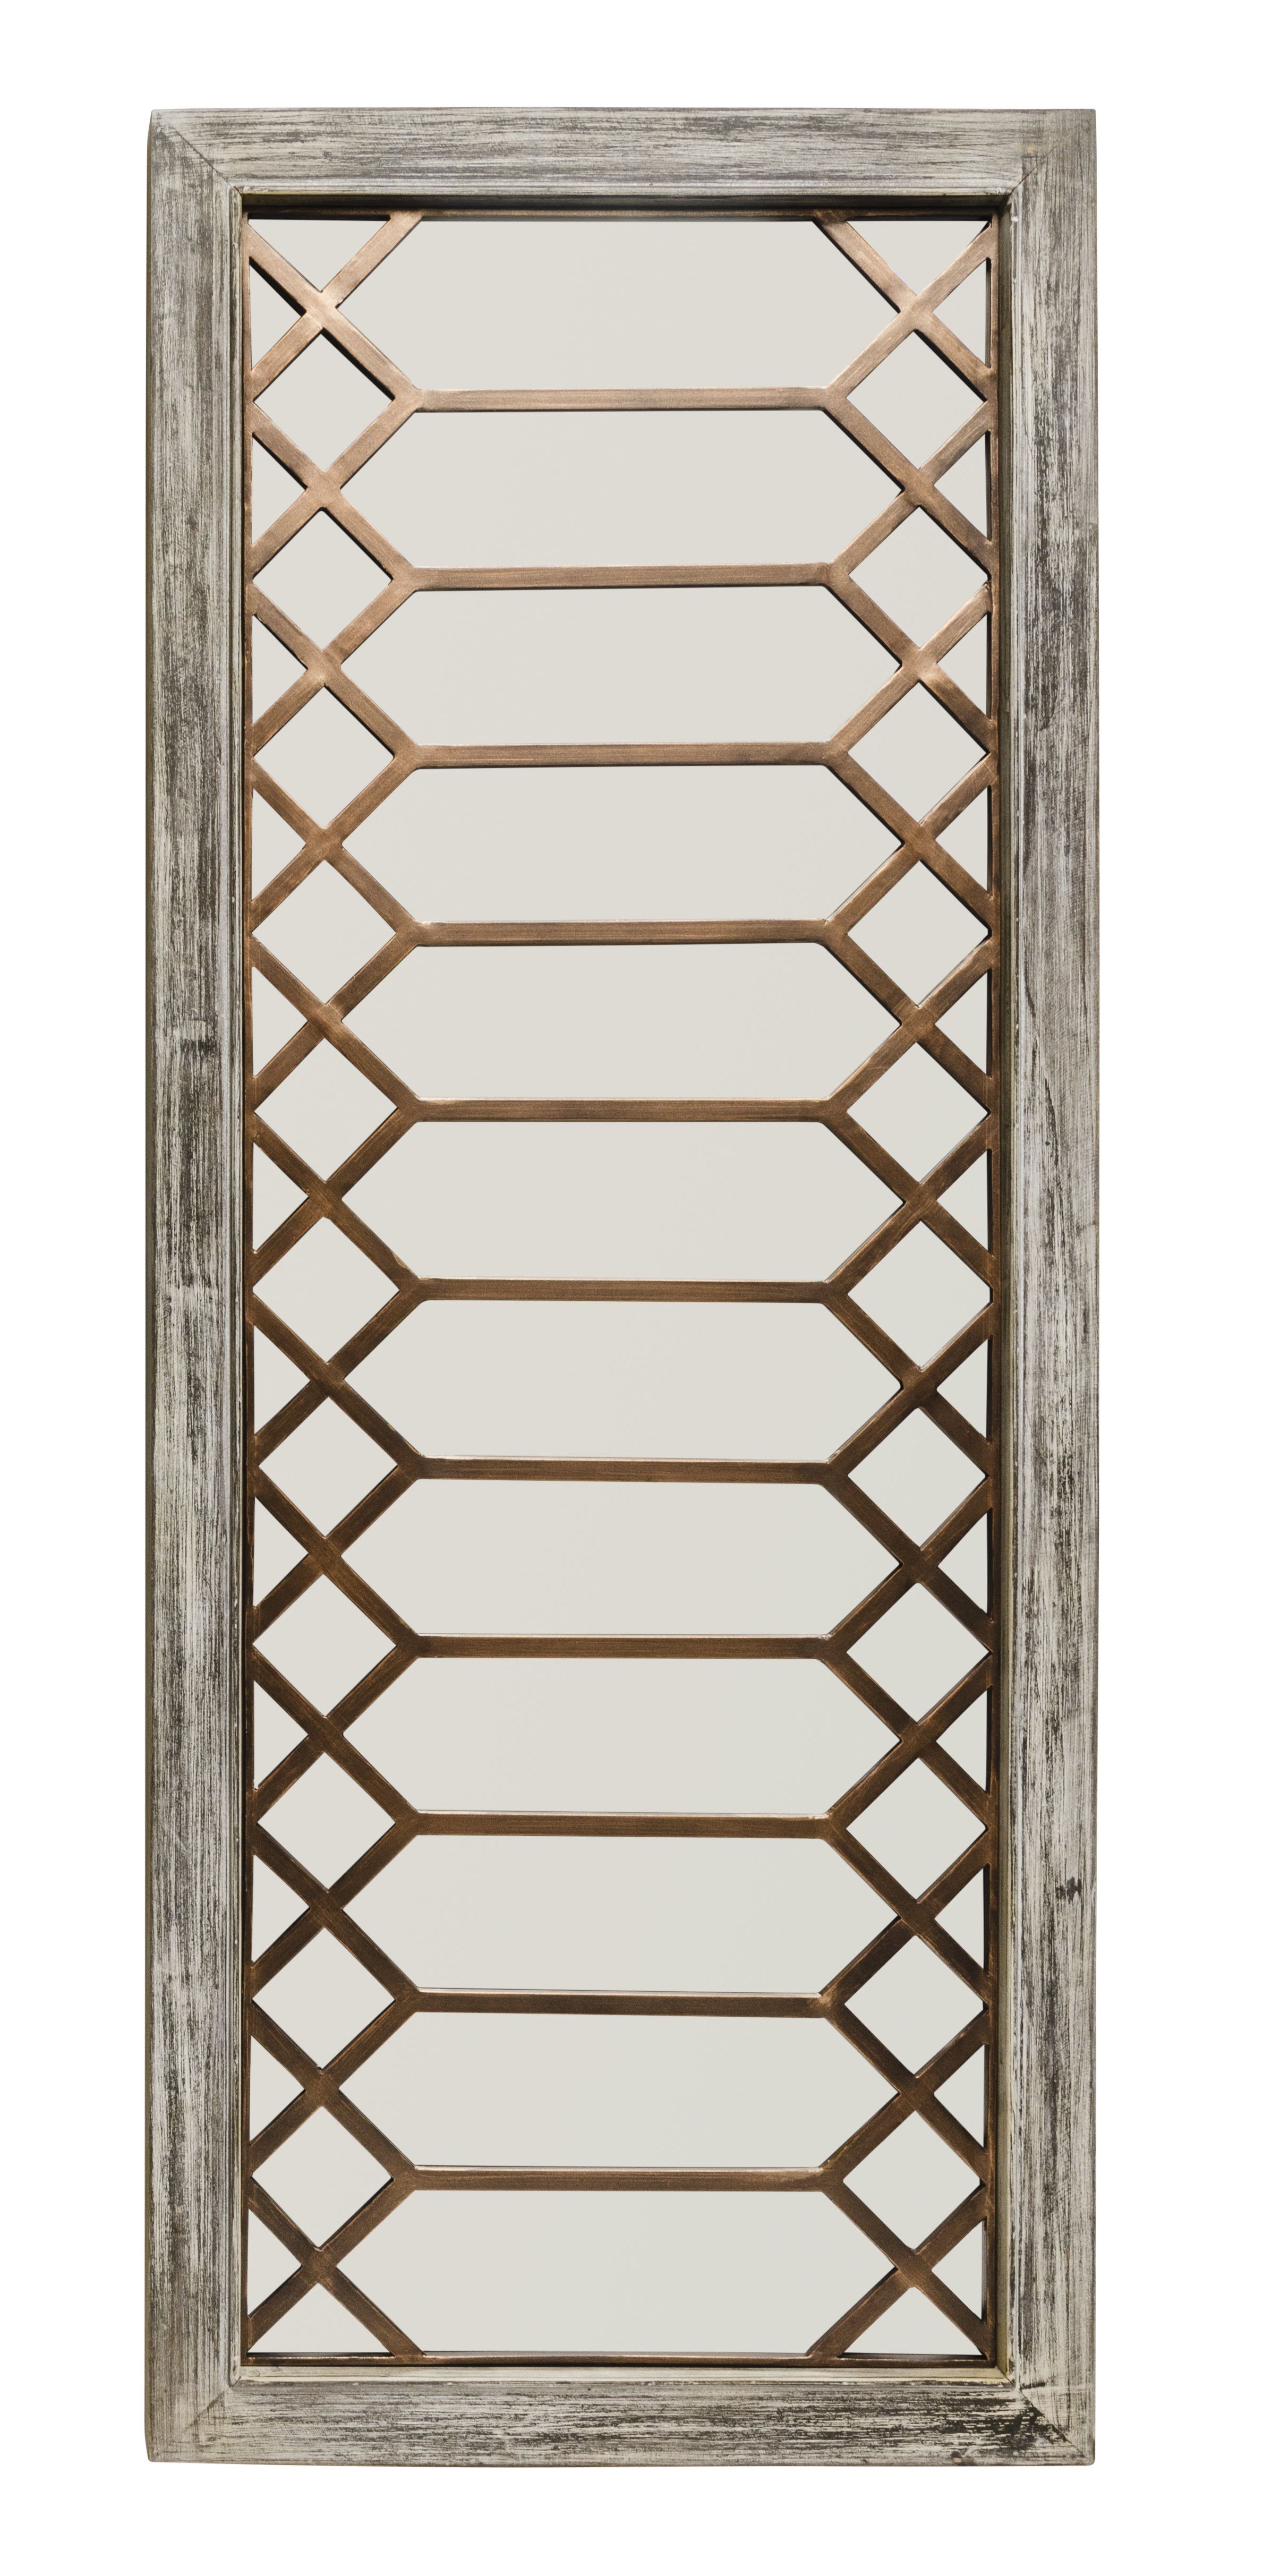 Widely Used Polito Cottage/country Wall Mirror Throughout Polito Cottage/country Wall Mirrors (View 1 of 20)